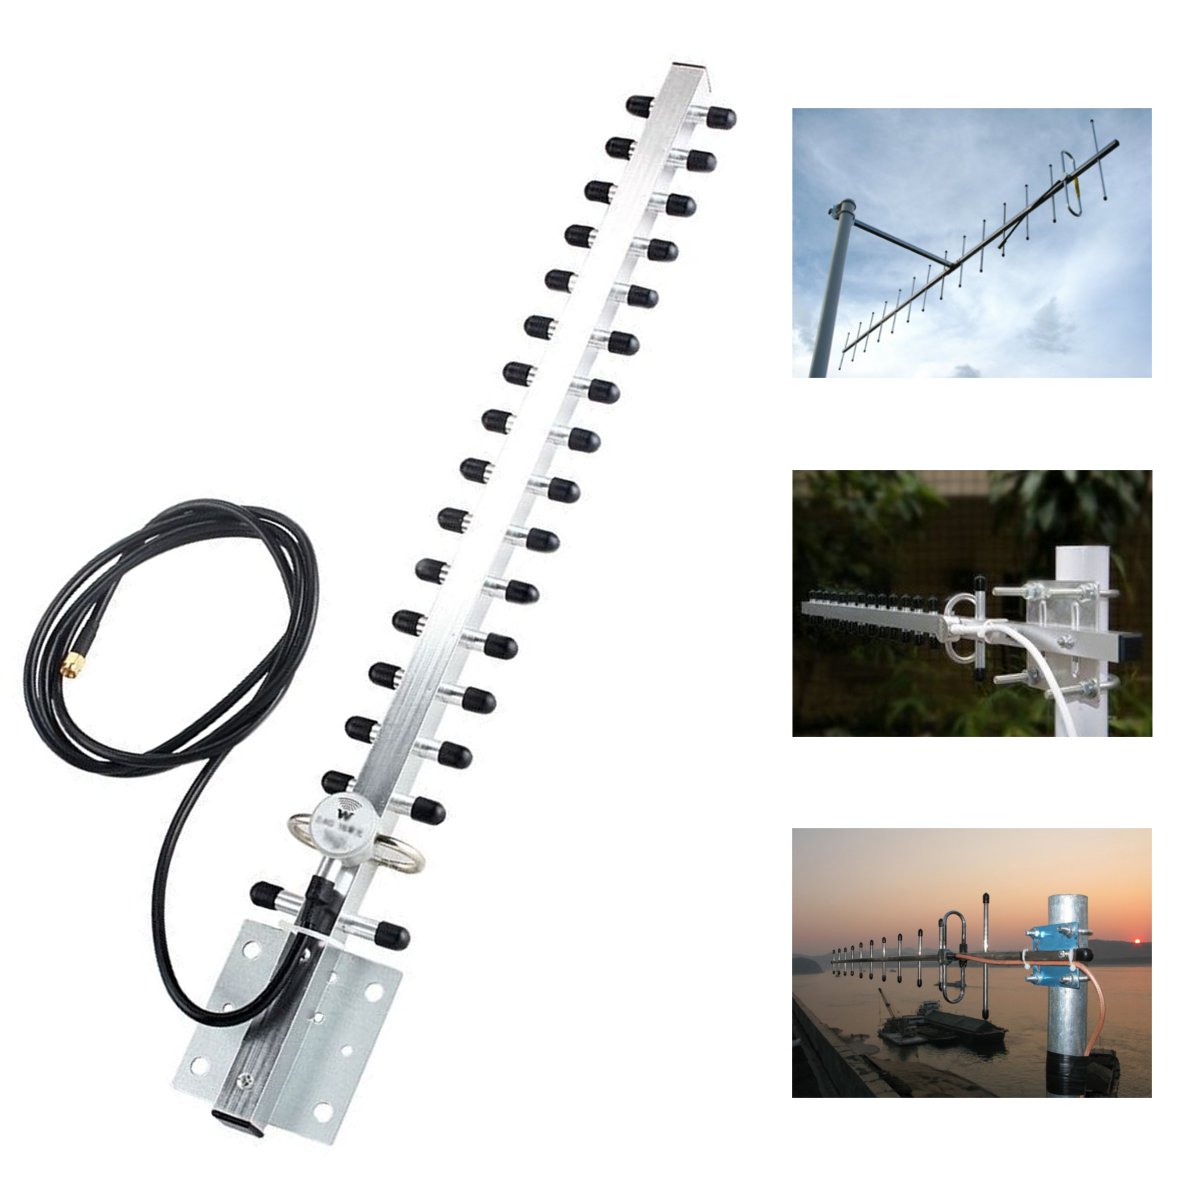 RP-SMA-24GHz-25dBi-Directional-Outdoor-WiFi-Antenna-Wireless-Yagi-Antenna-with-Cable-for-Extending-W-1679563-1